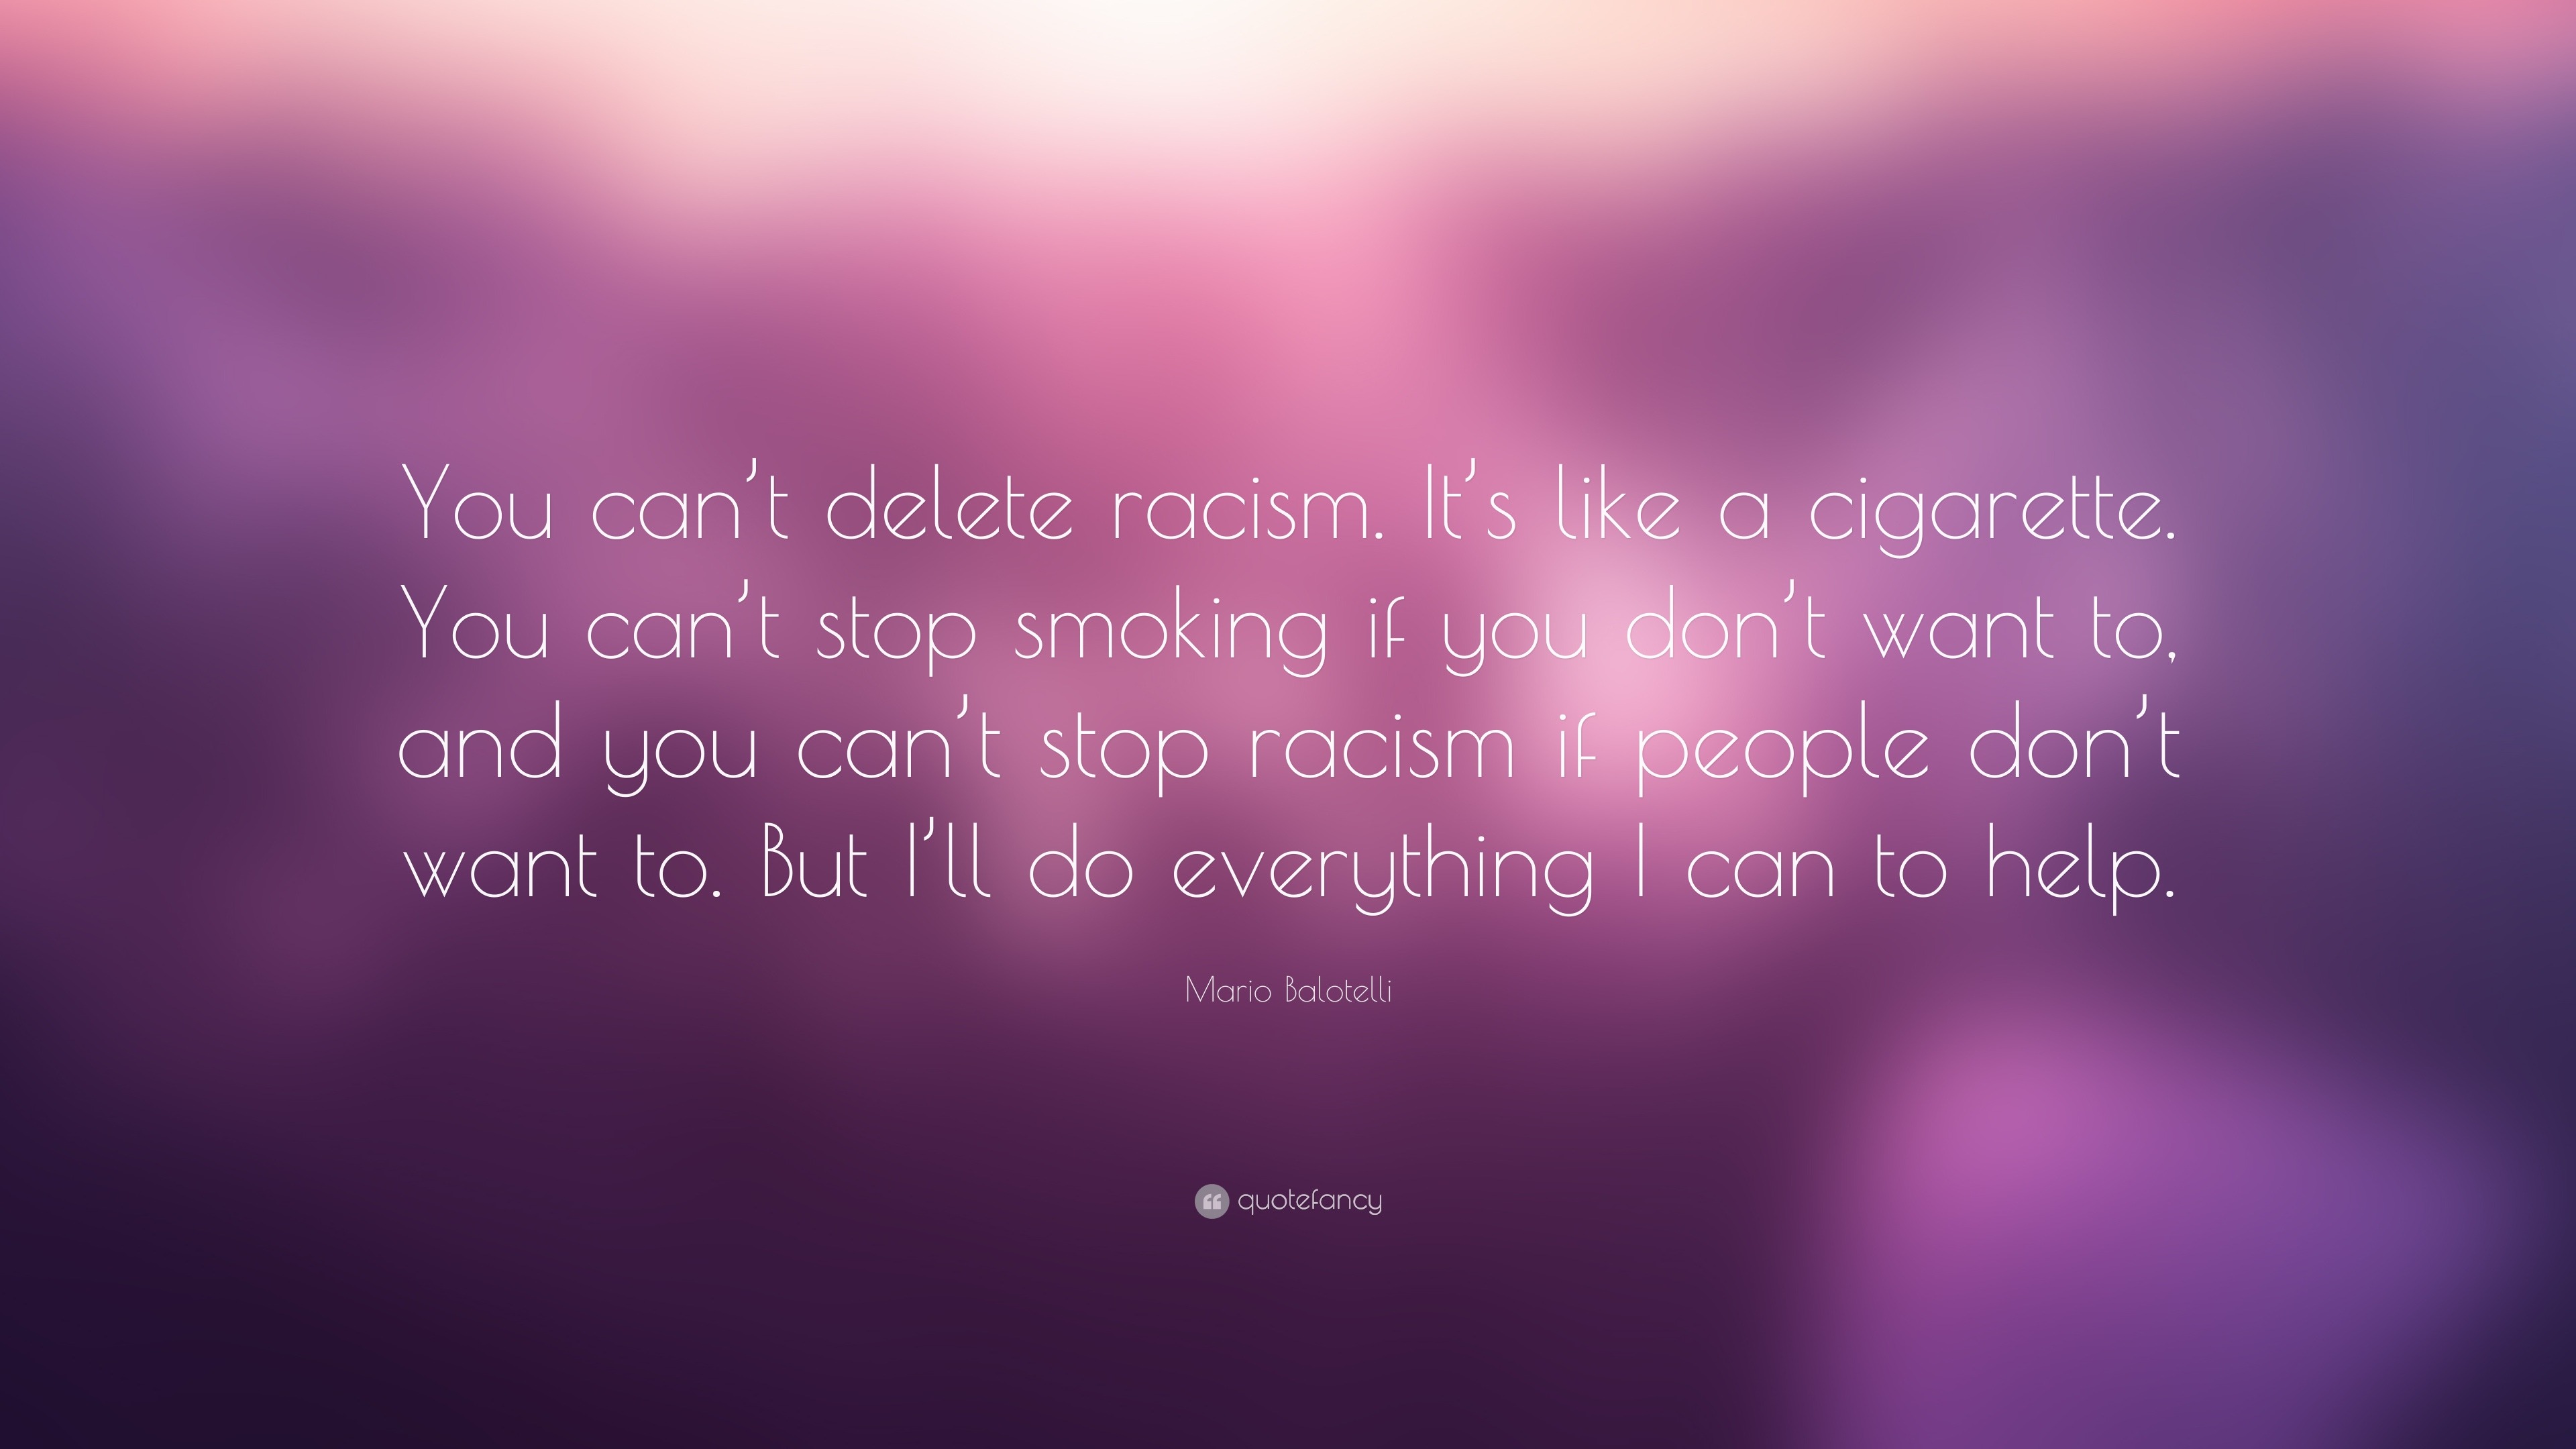 Mario Balotelli Quote: “You can’t delete racism. It’s like a cigarette ...